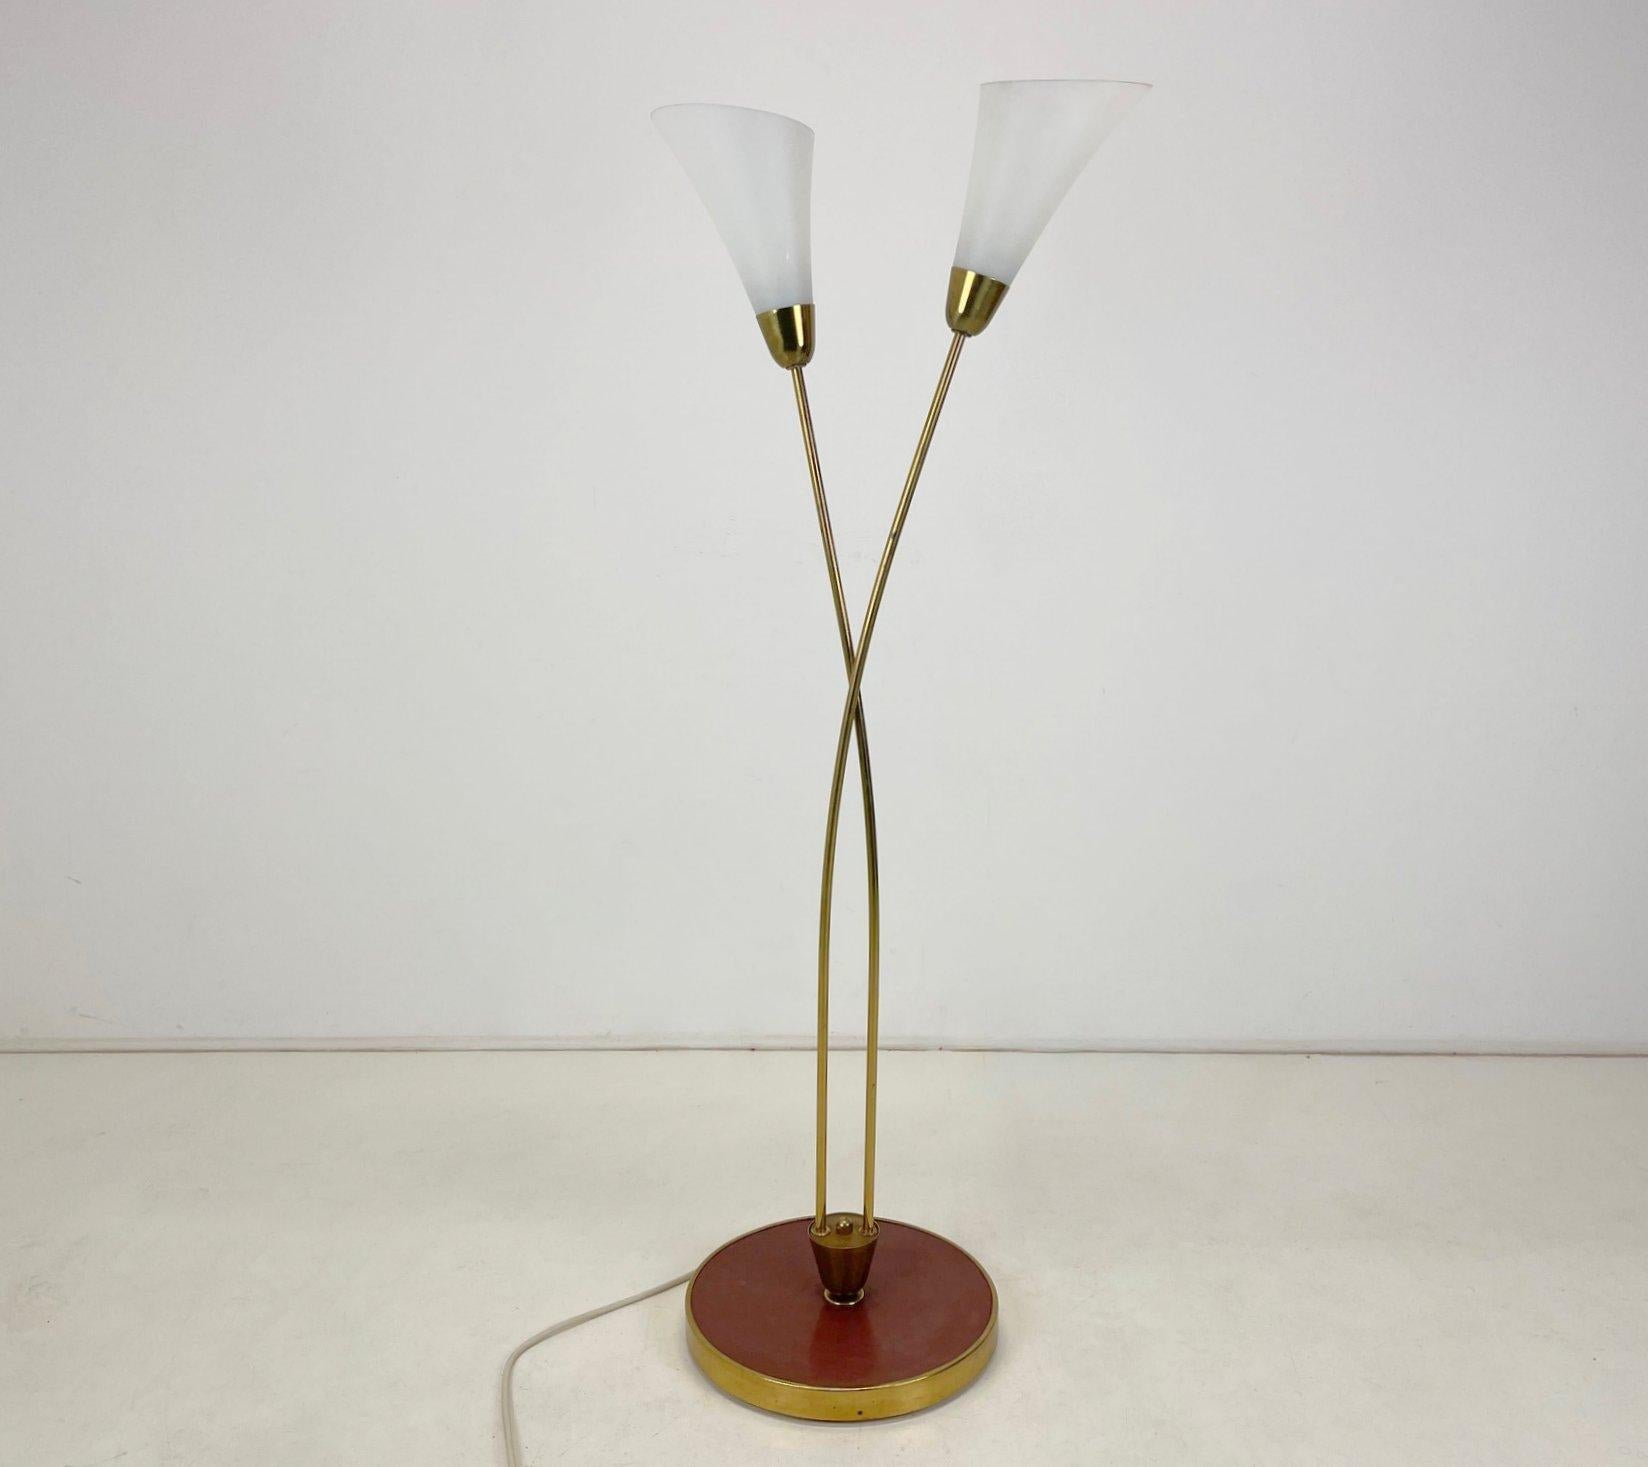 Beautiful Art Deco floor lamp made in former Czechoslovakia in the early 20th century. Made of brass with patina and opaline glass.